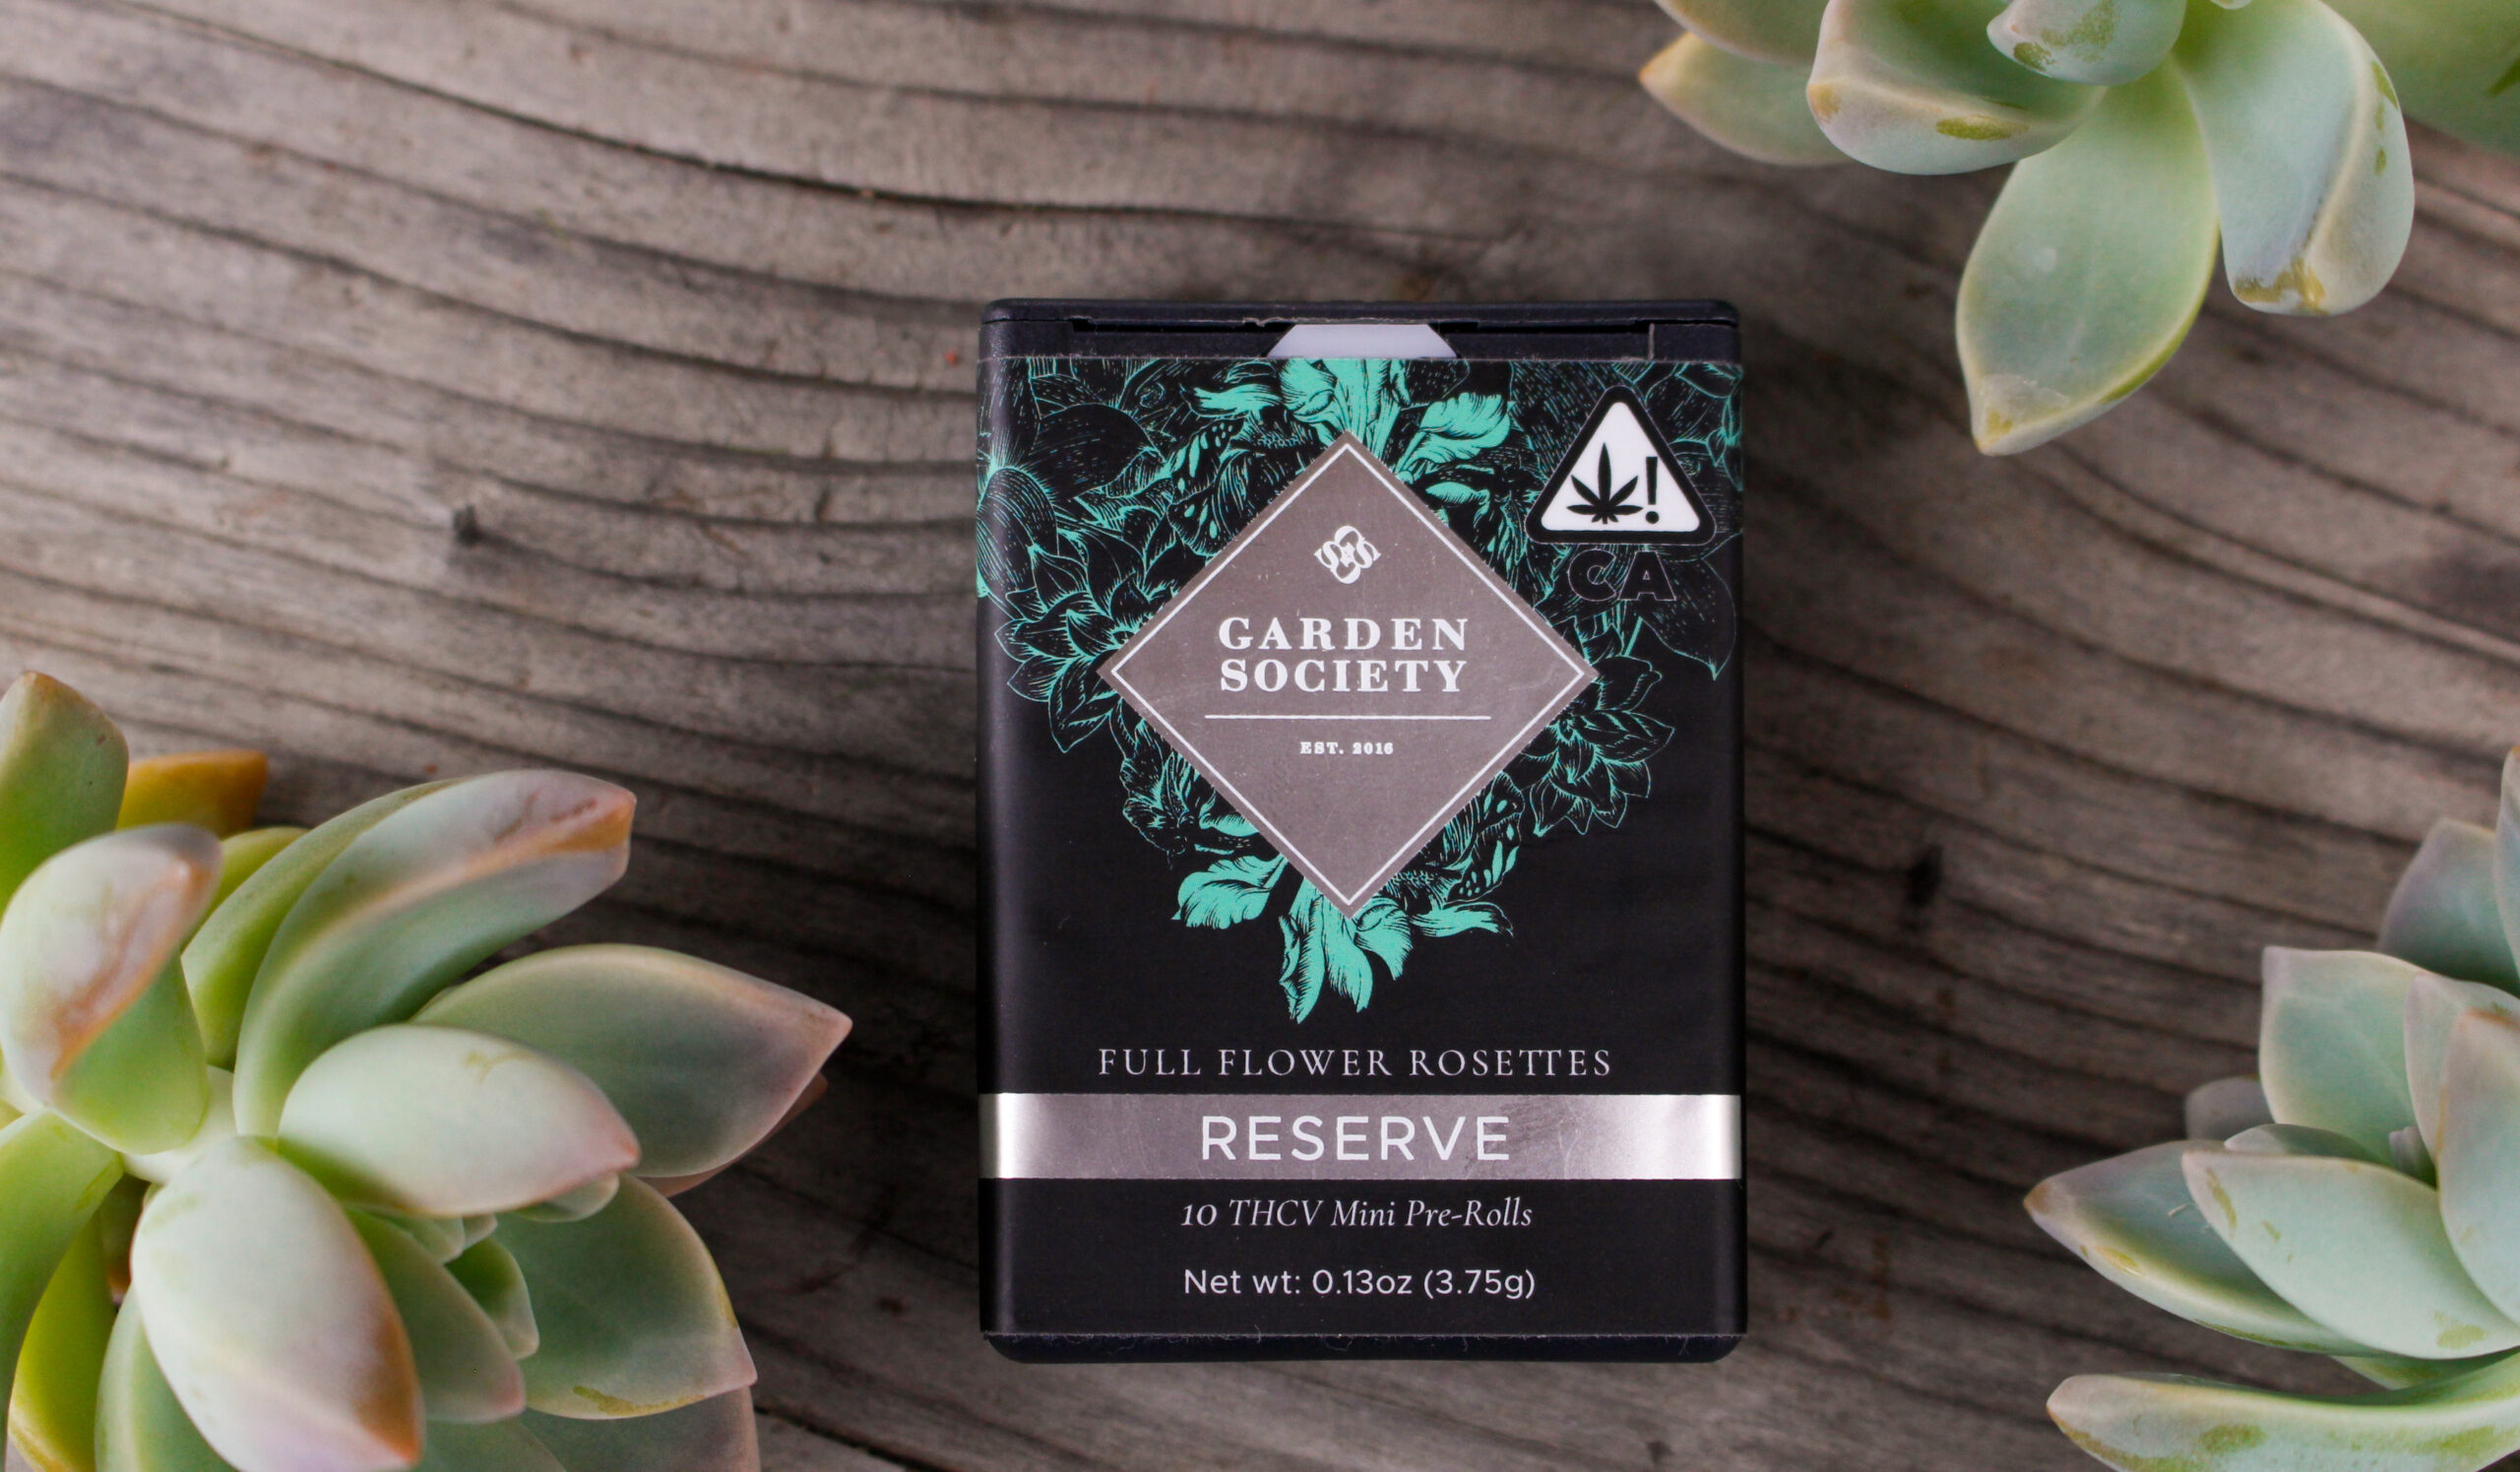 Garden Society Introduces New Reserve Product Line 